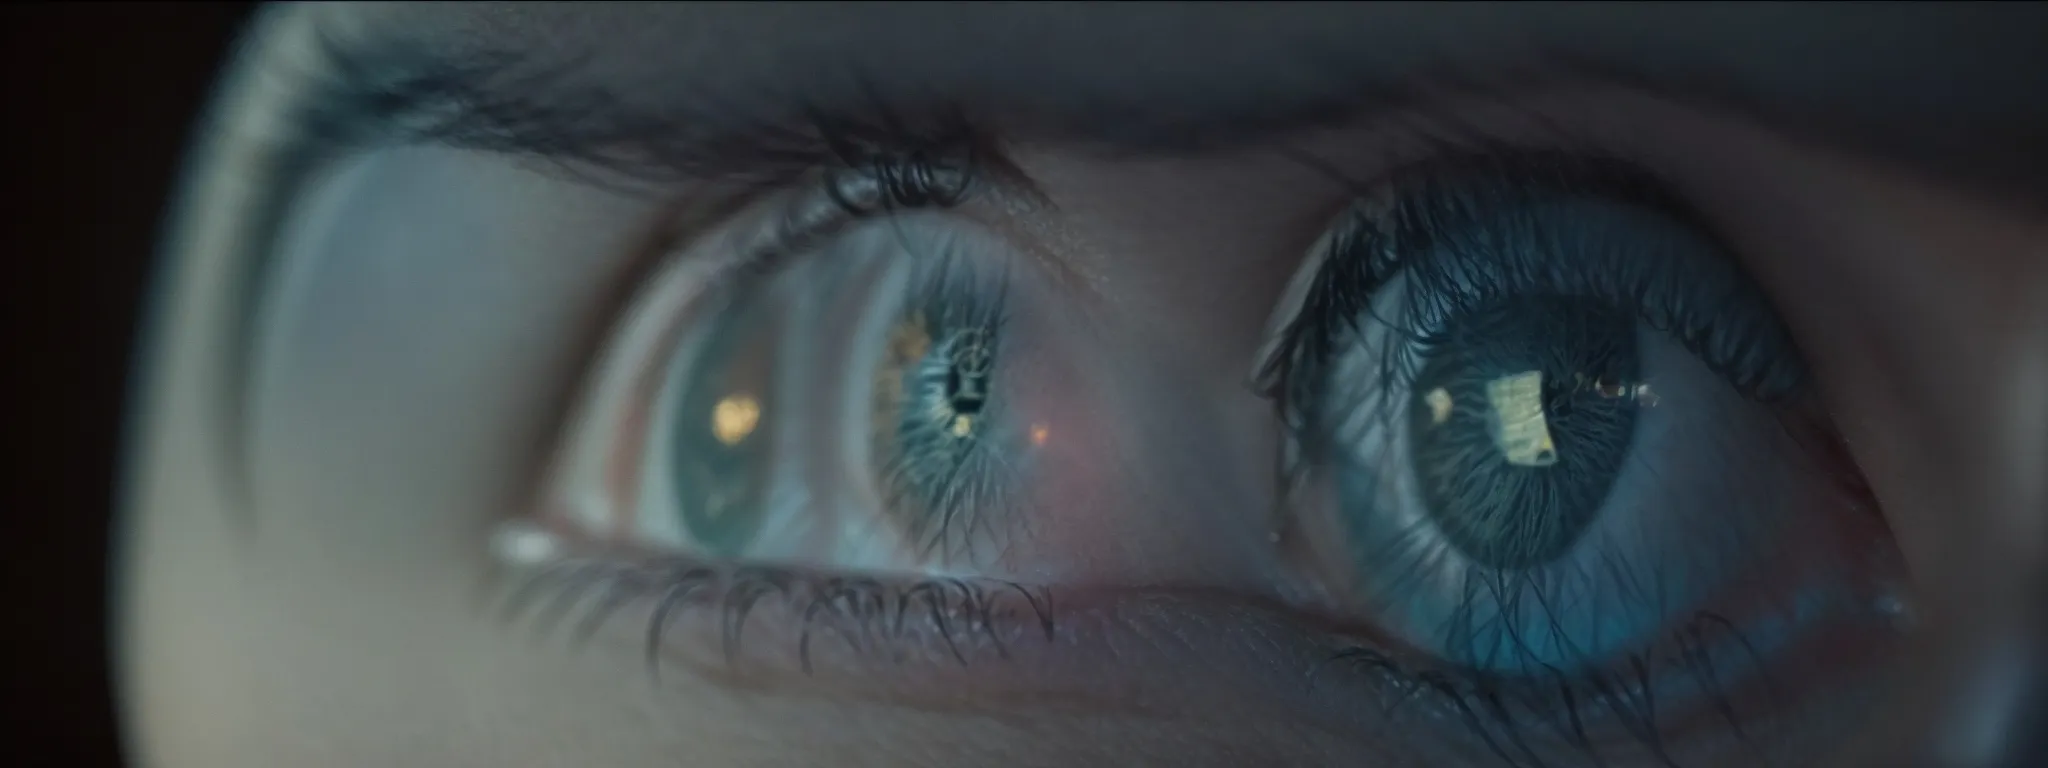 a close-up view of a person's eye reflecting a computer screen showing the google homepage.